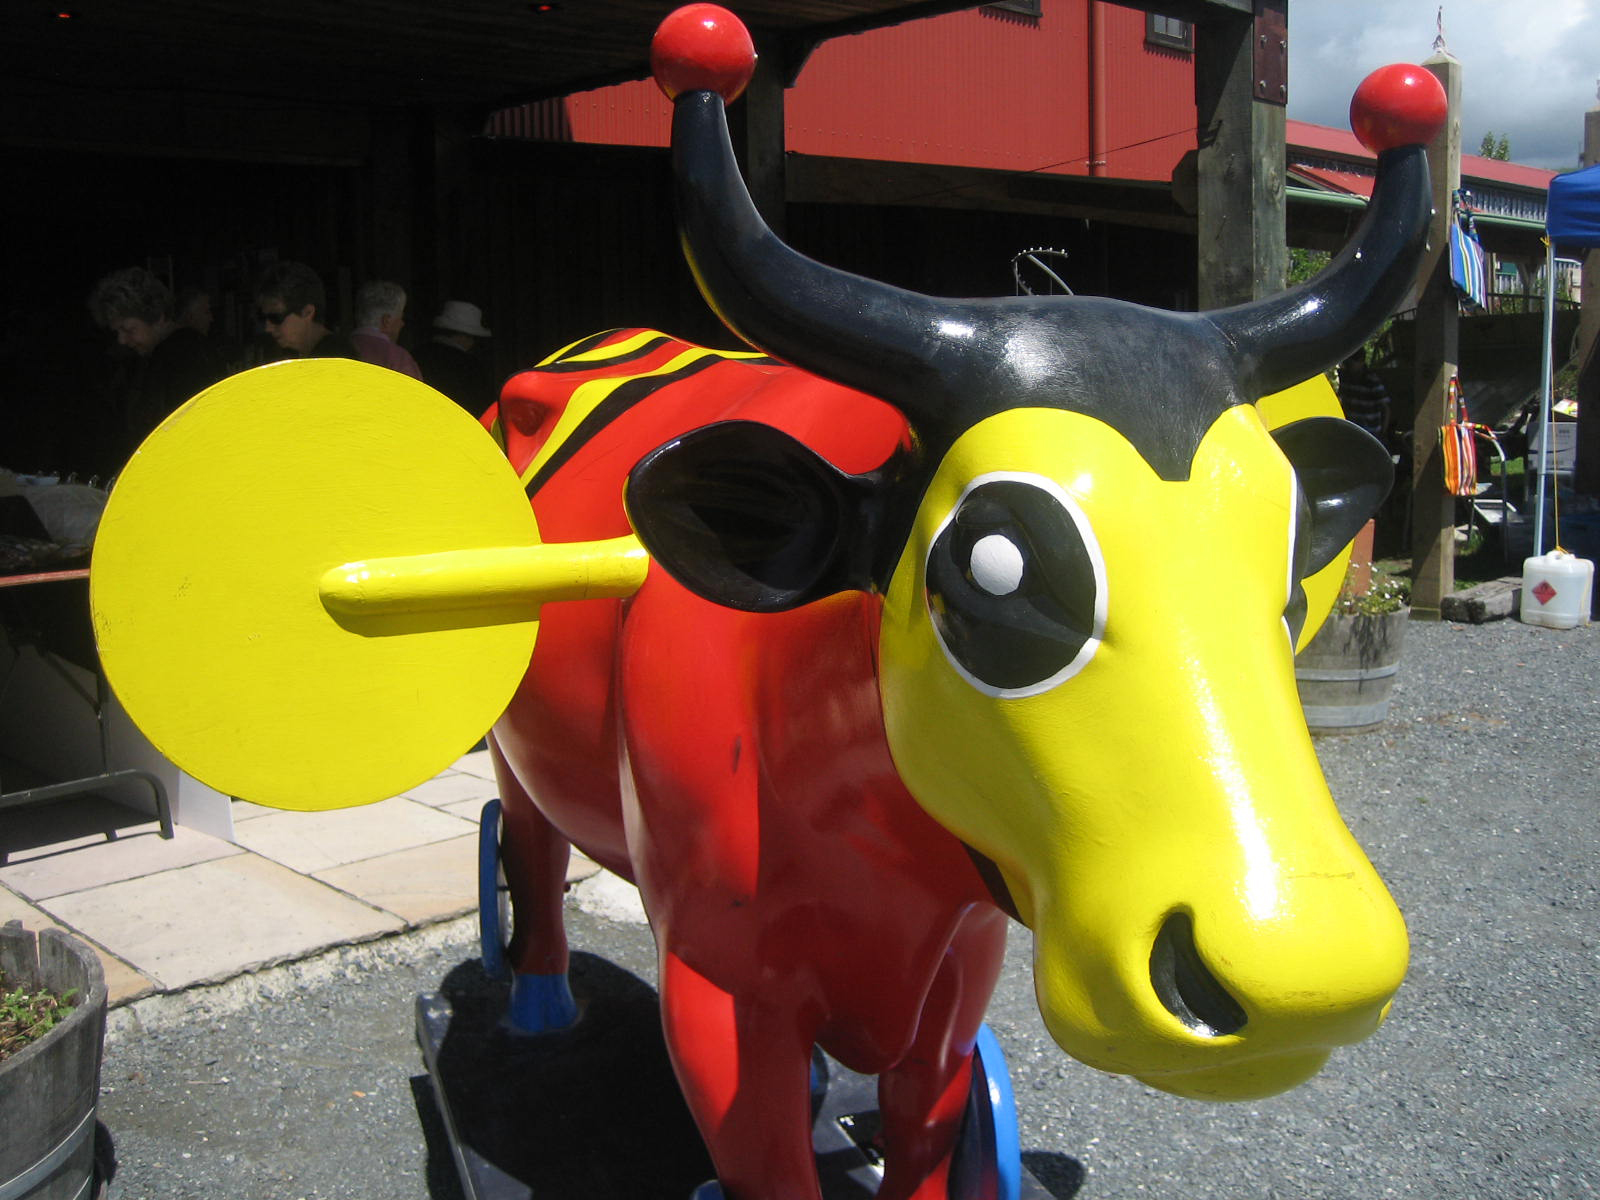 Buzzybee / Cow - really combining NZ icons!